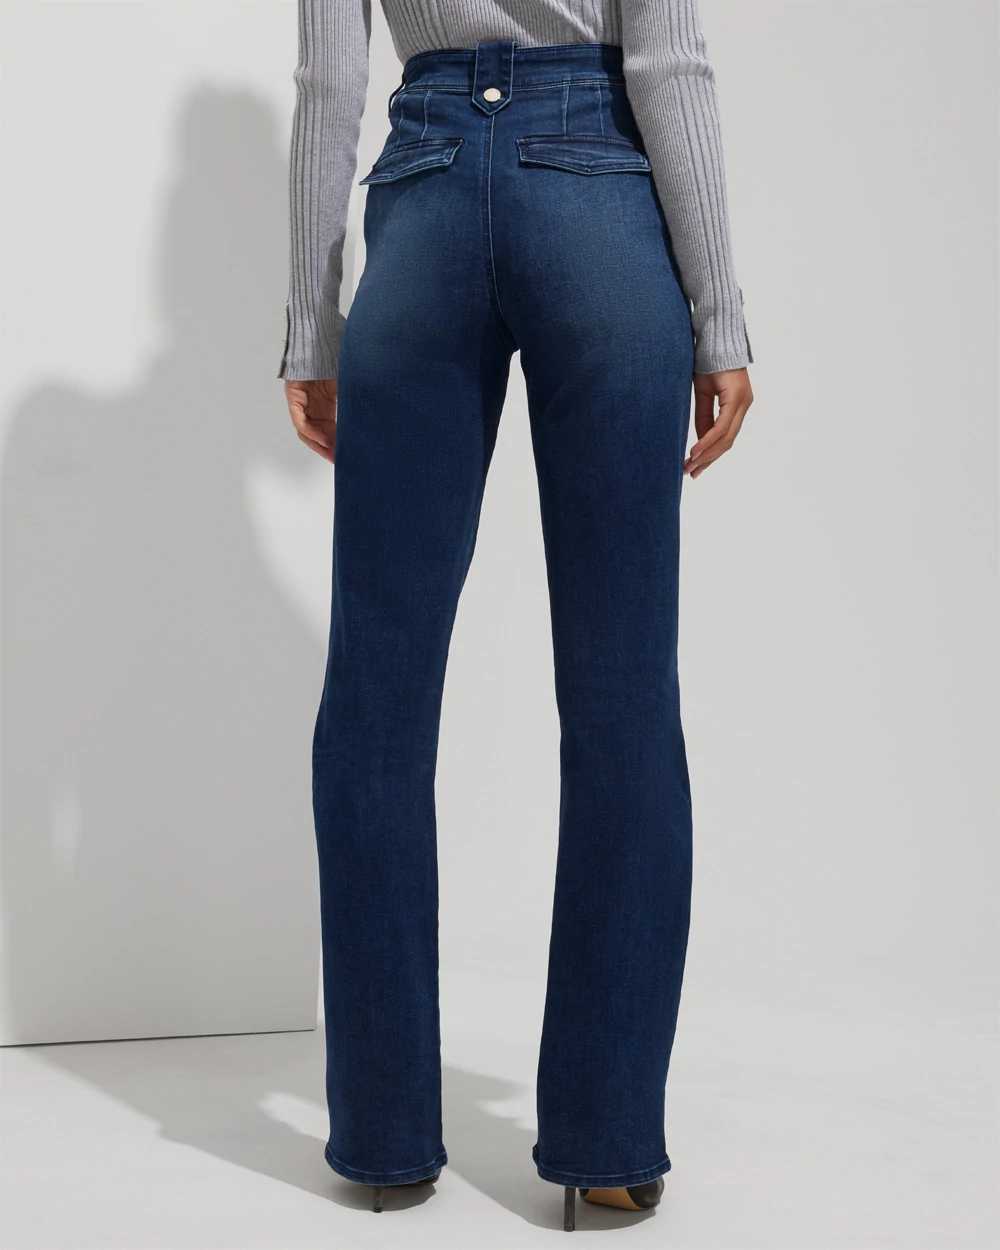 Outlet WHBM XHR Denim Trouser With Tab click to view larger image.